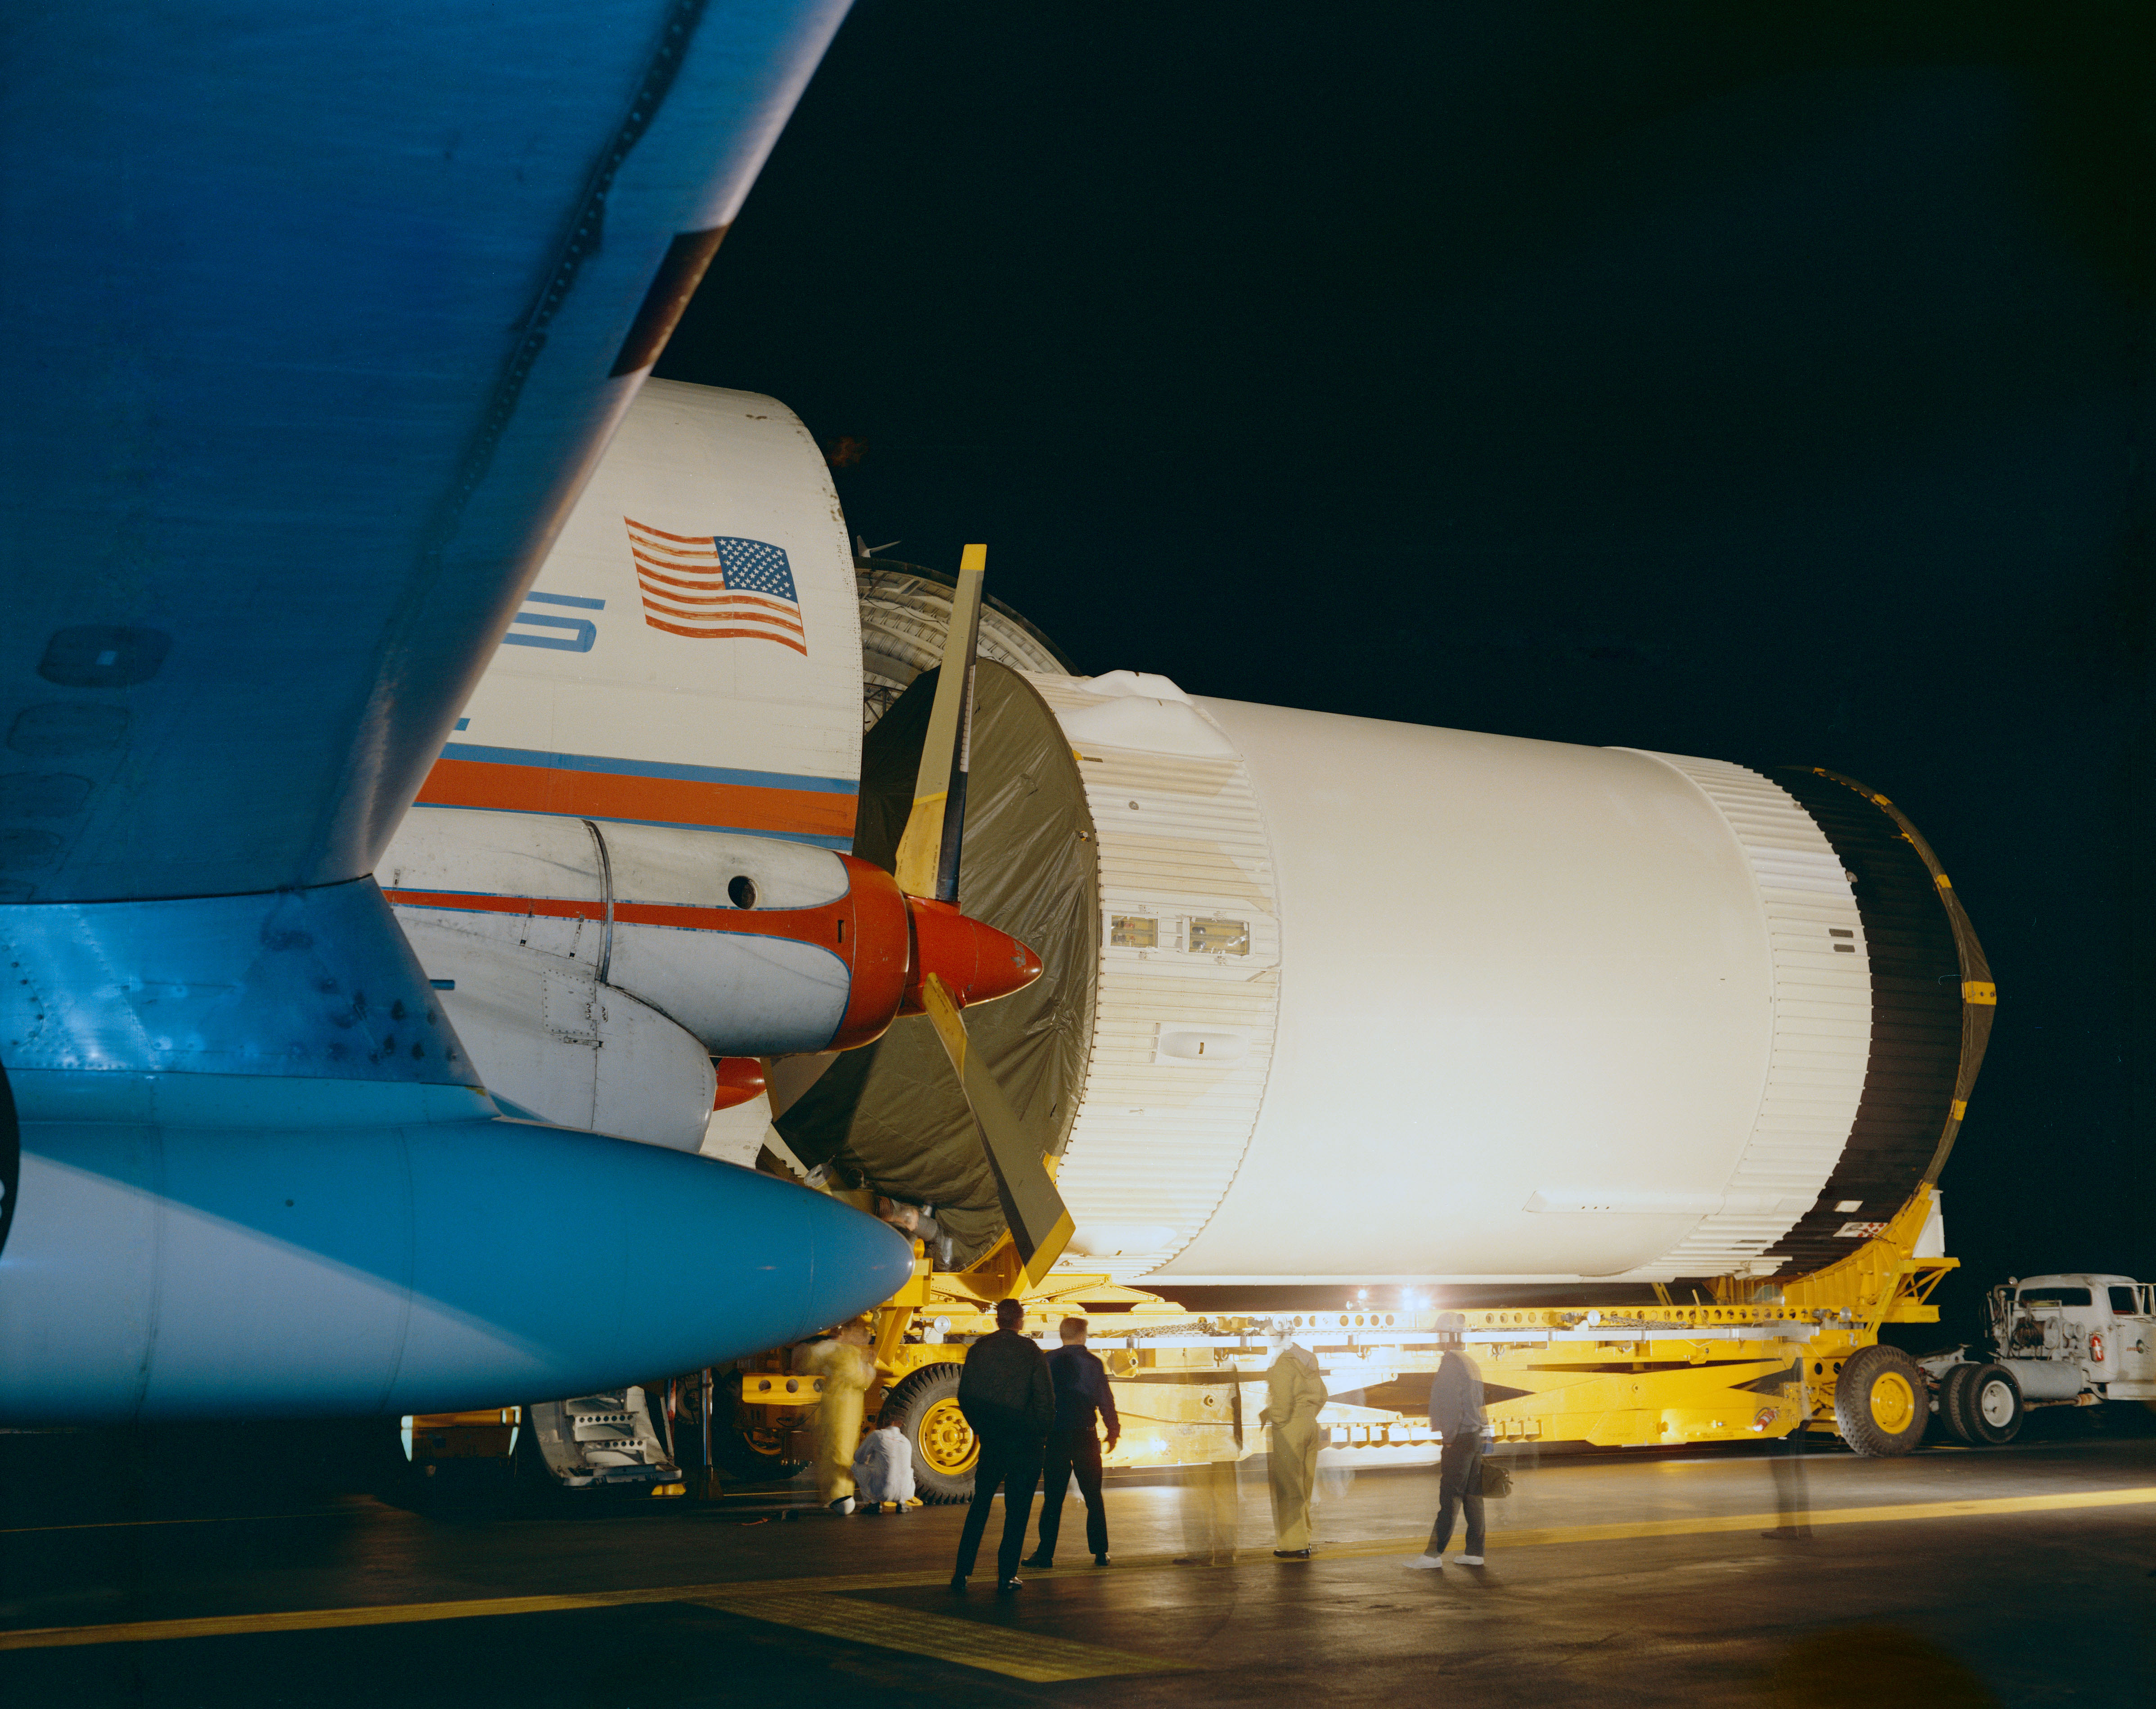 The S-IVB third stage for Apollo 11’s Saturn V rocket arrives at KSC